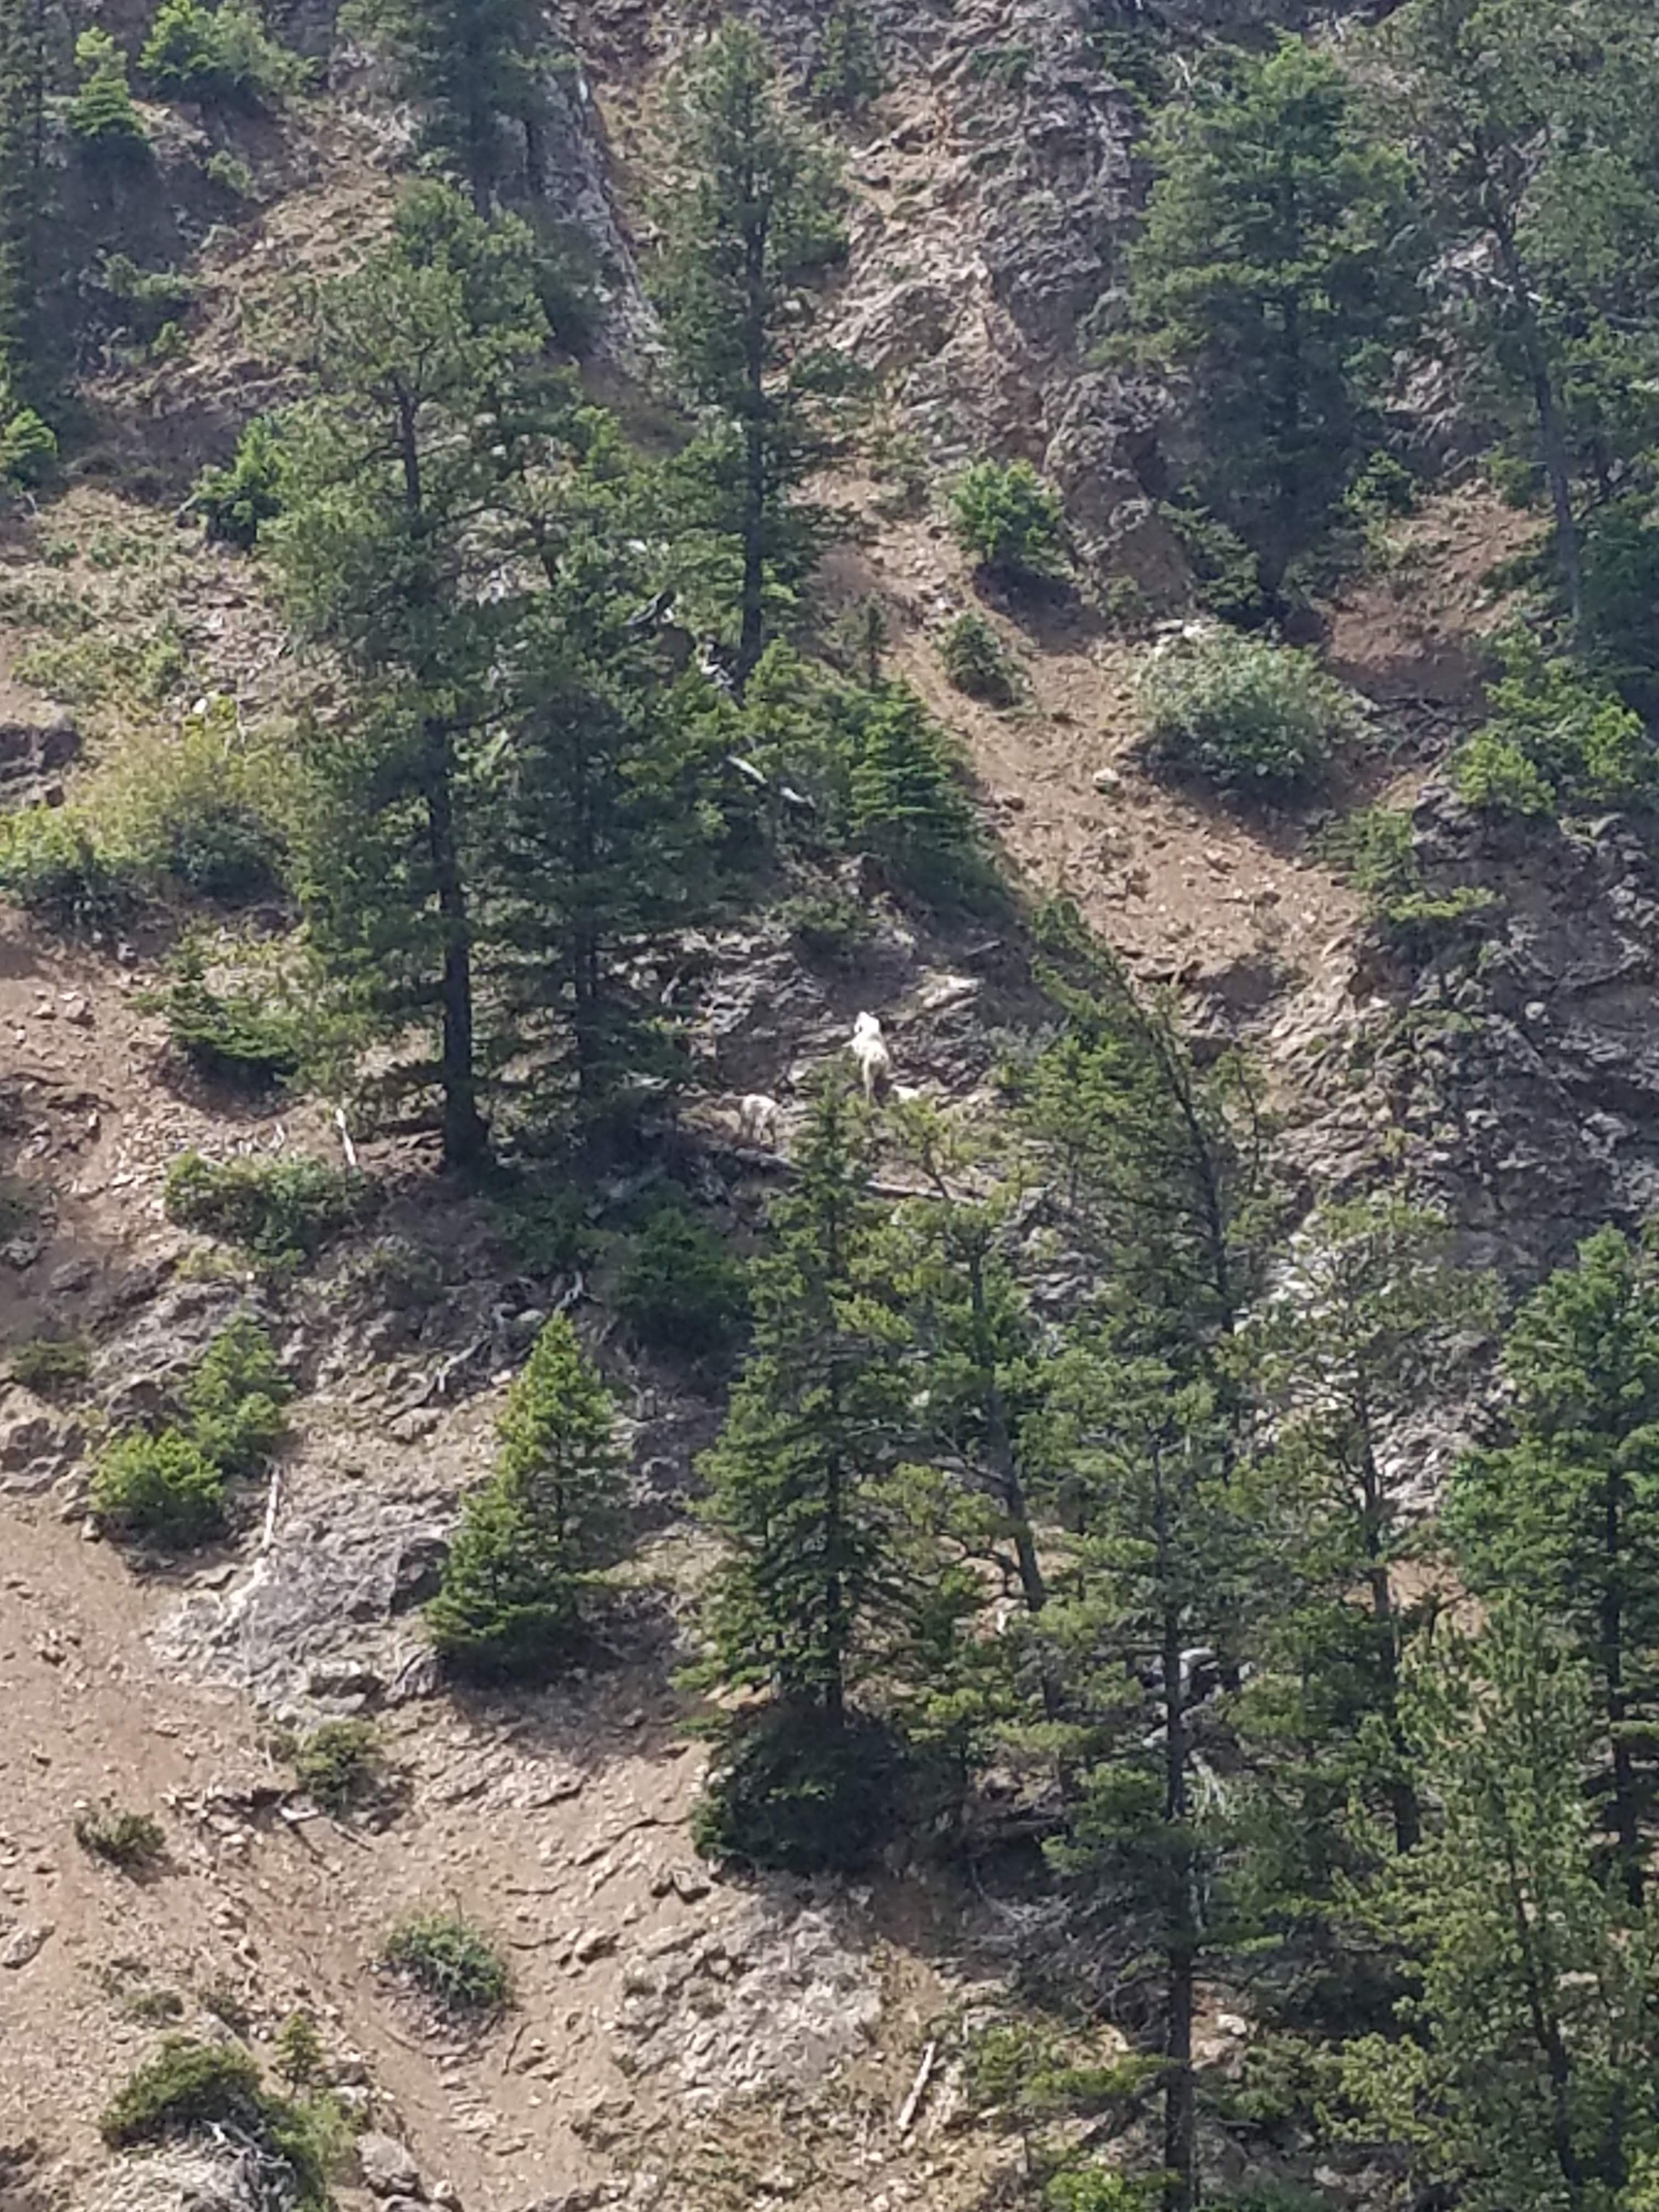 3 Bighorn Sheep climbing the cliffs along 287 only a few miles from camp